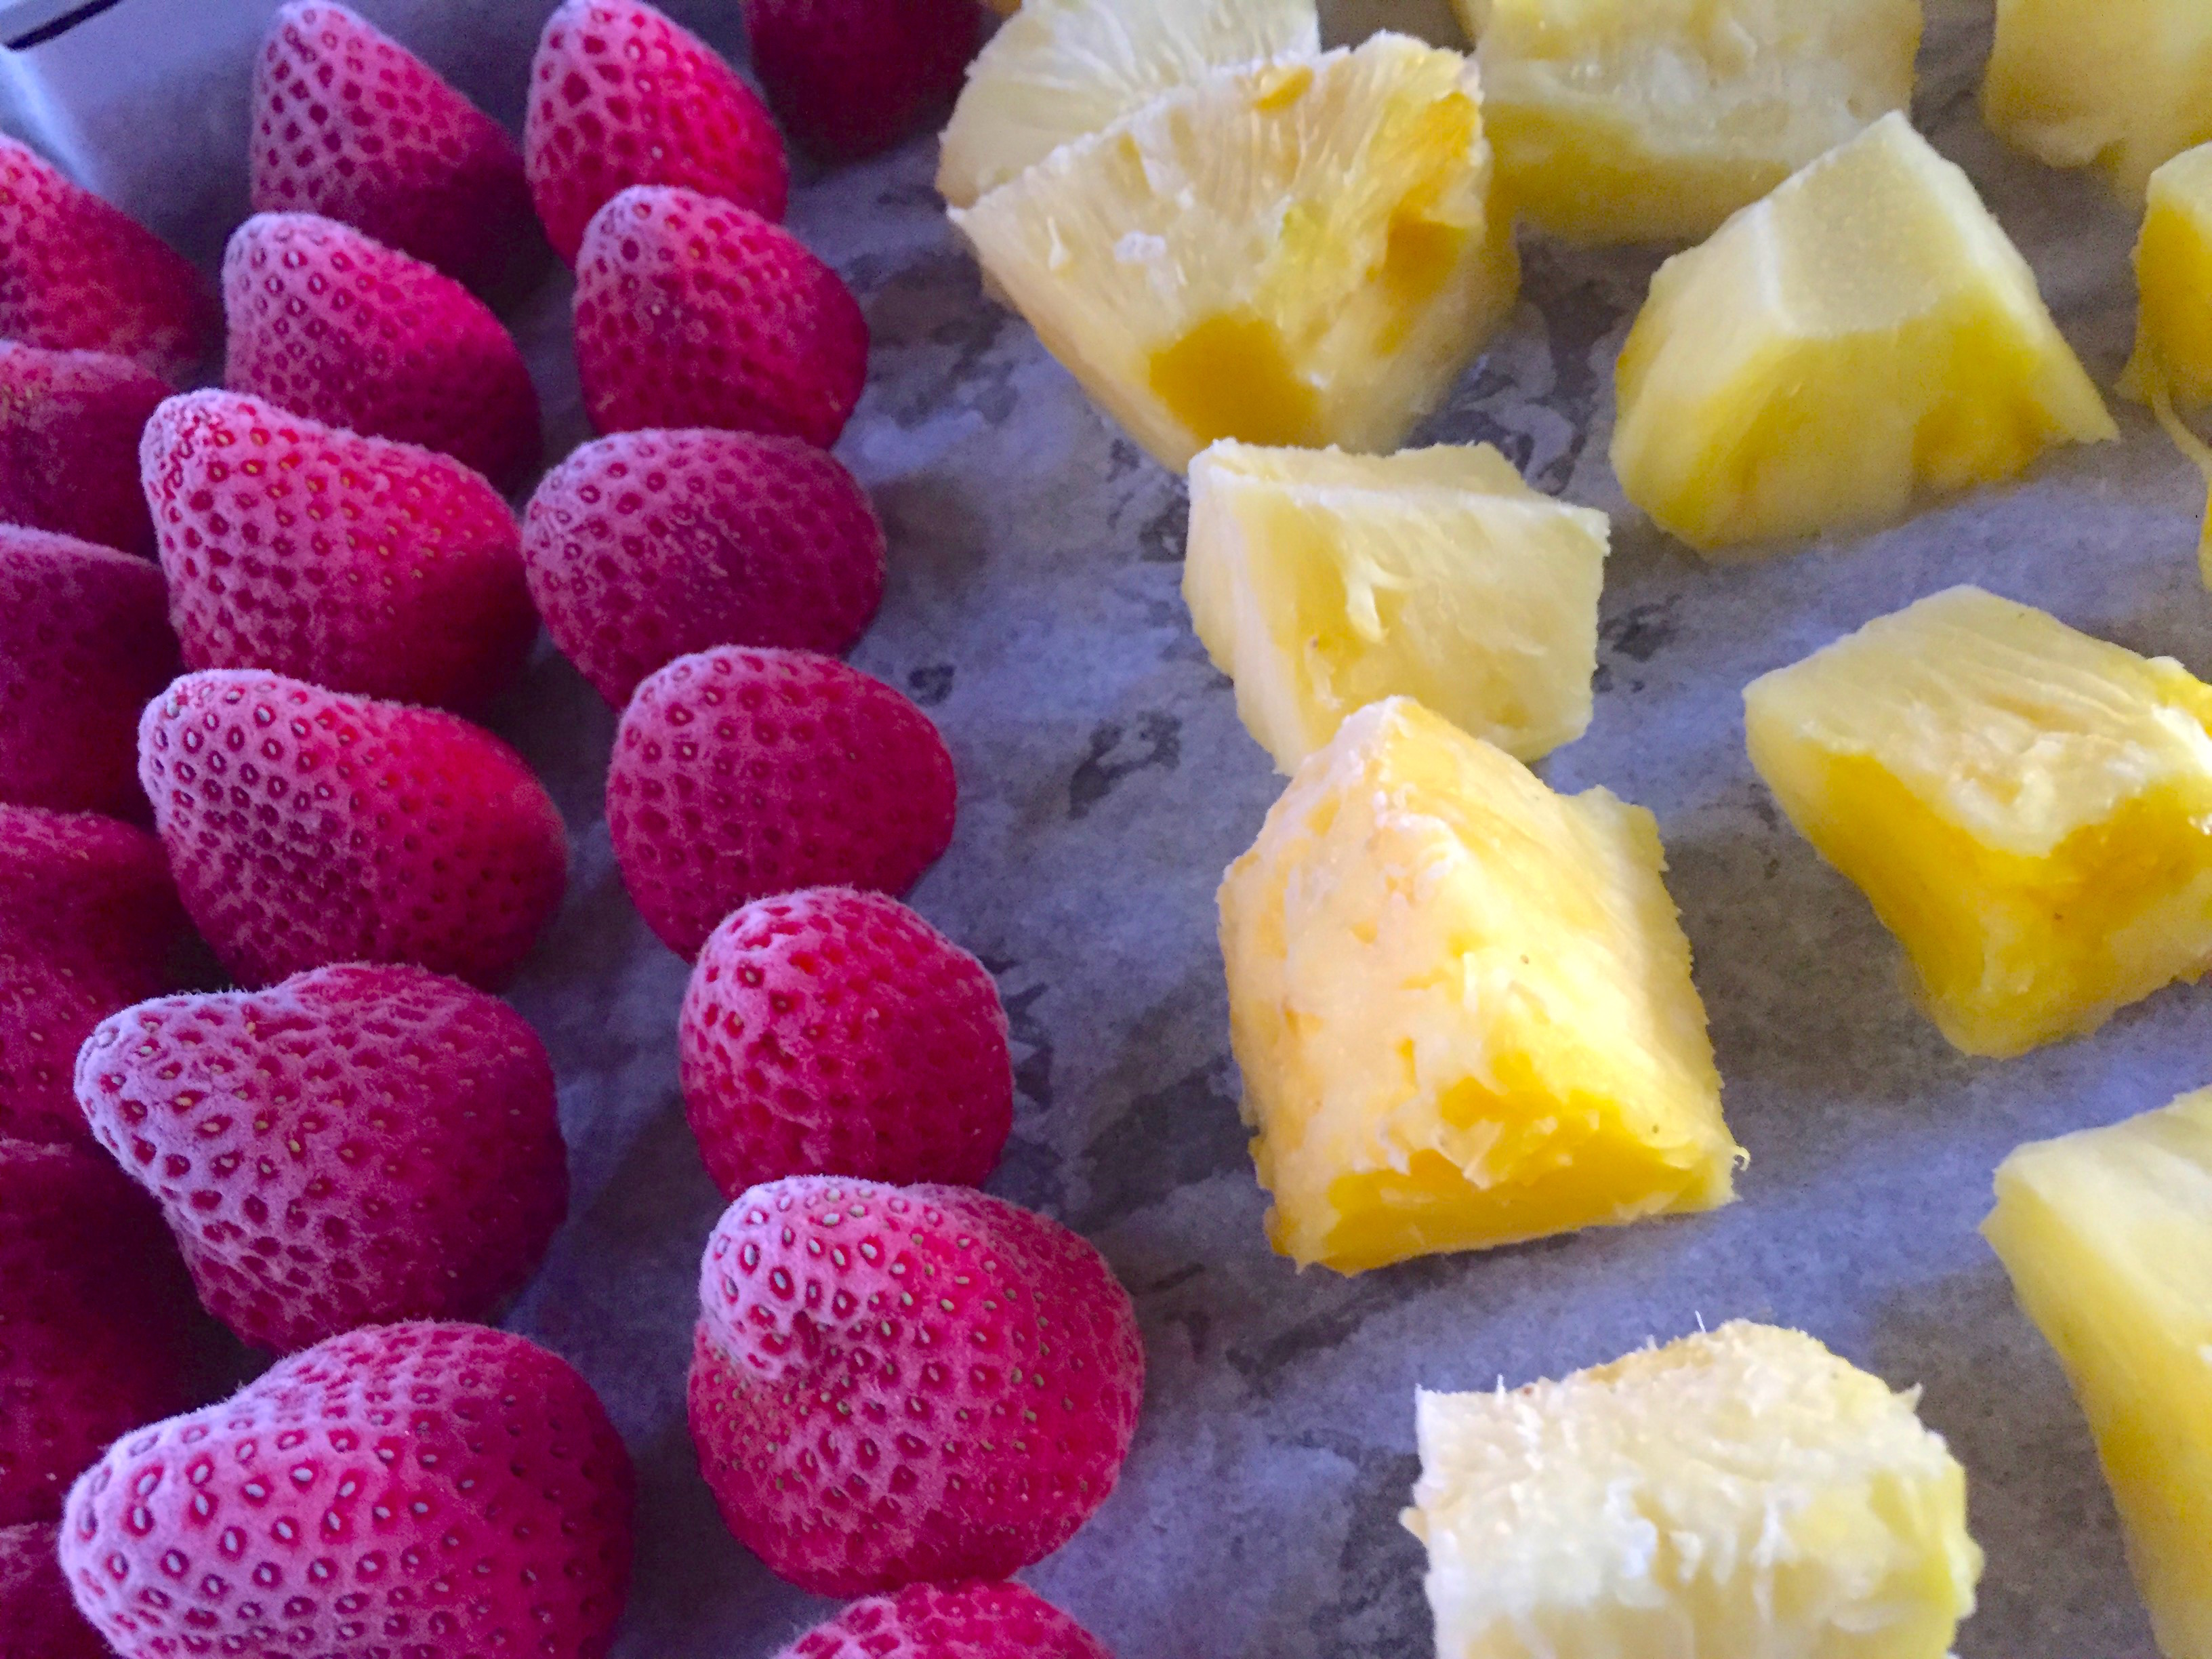 flash frozen pineapple chunks and strawberries on a baking sheet.